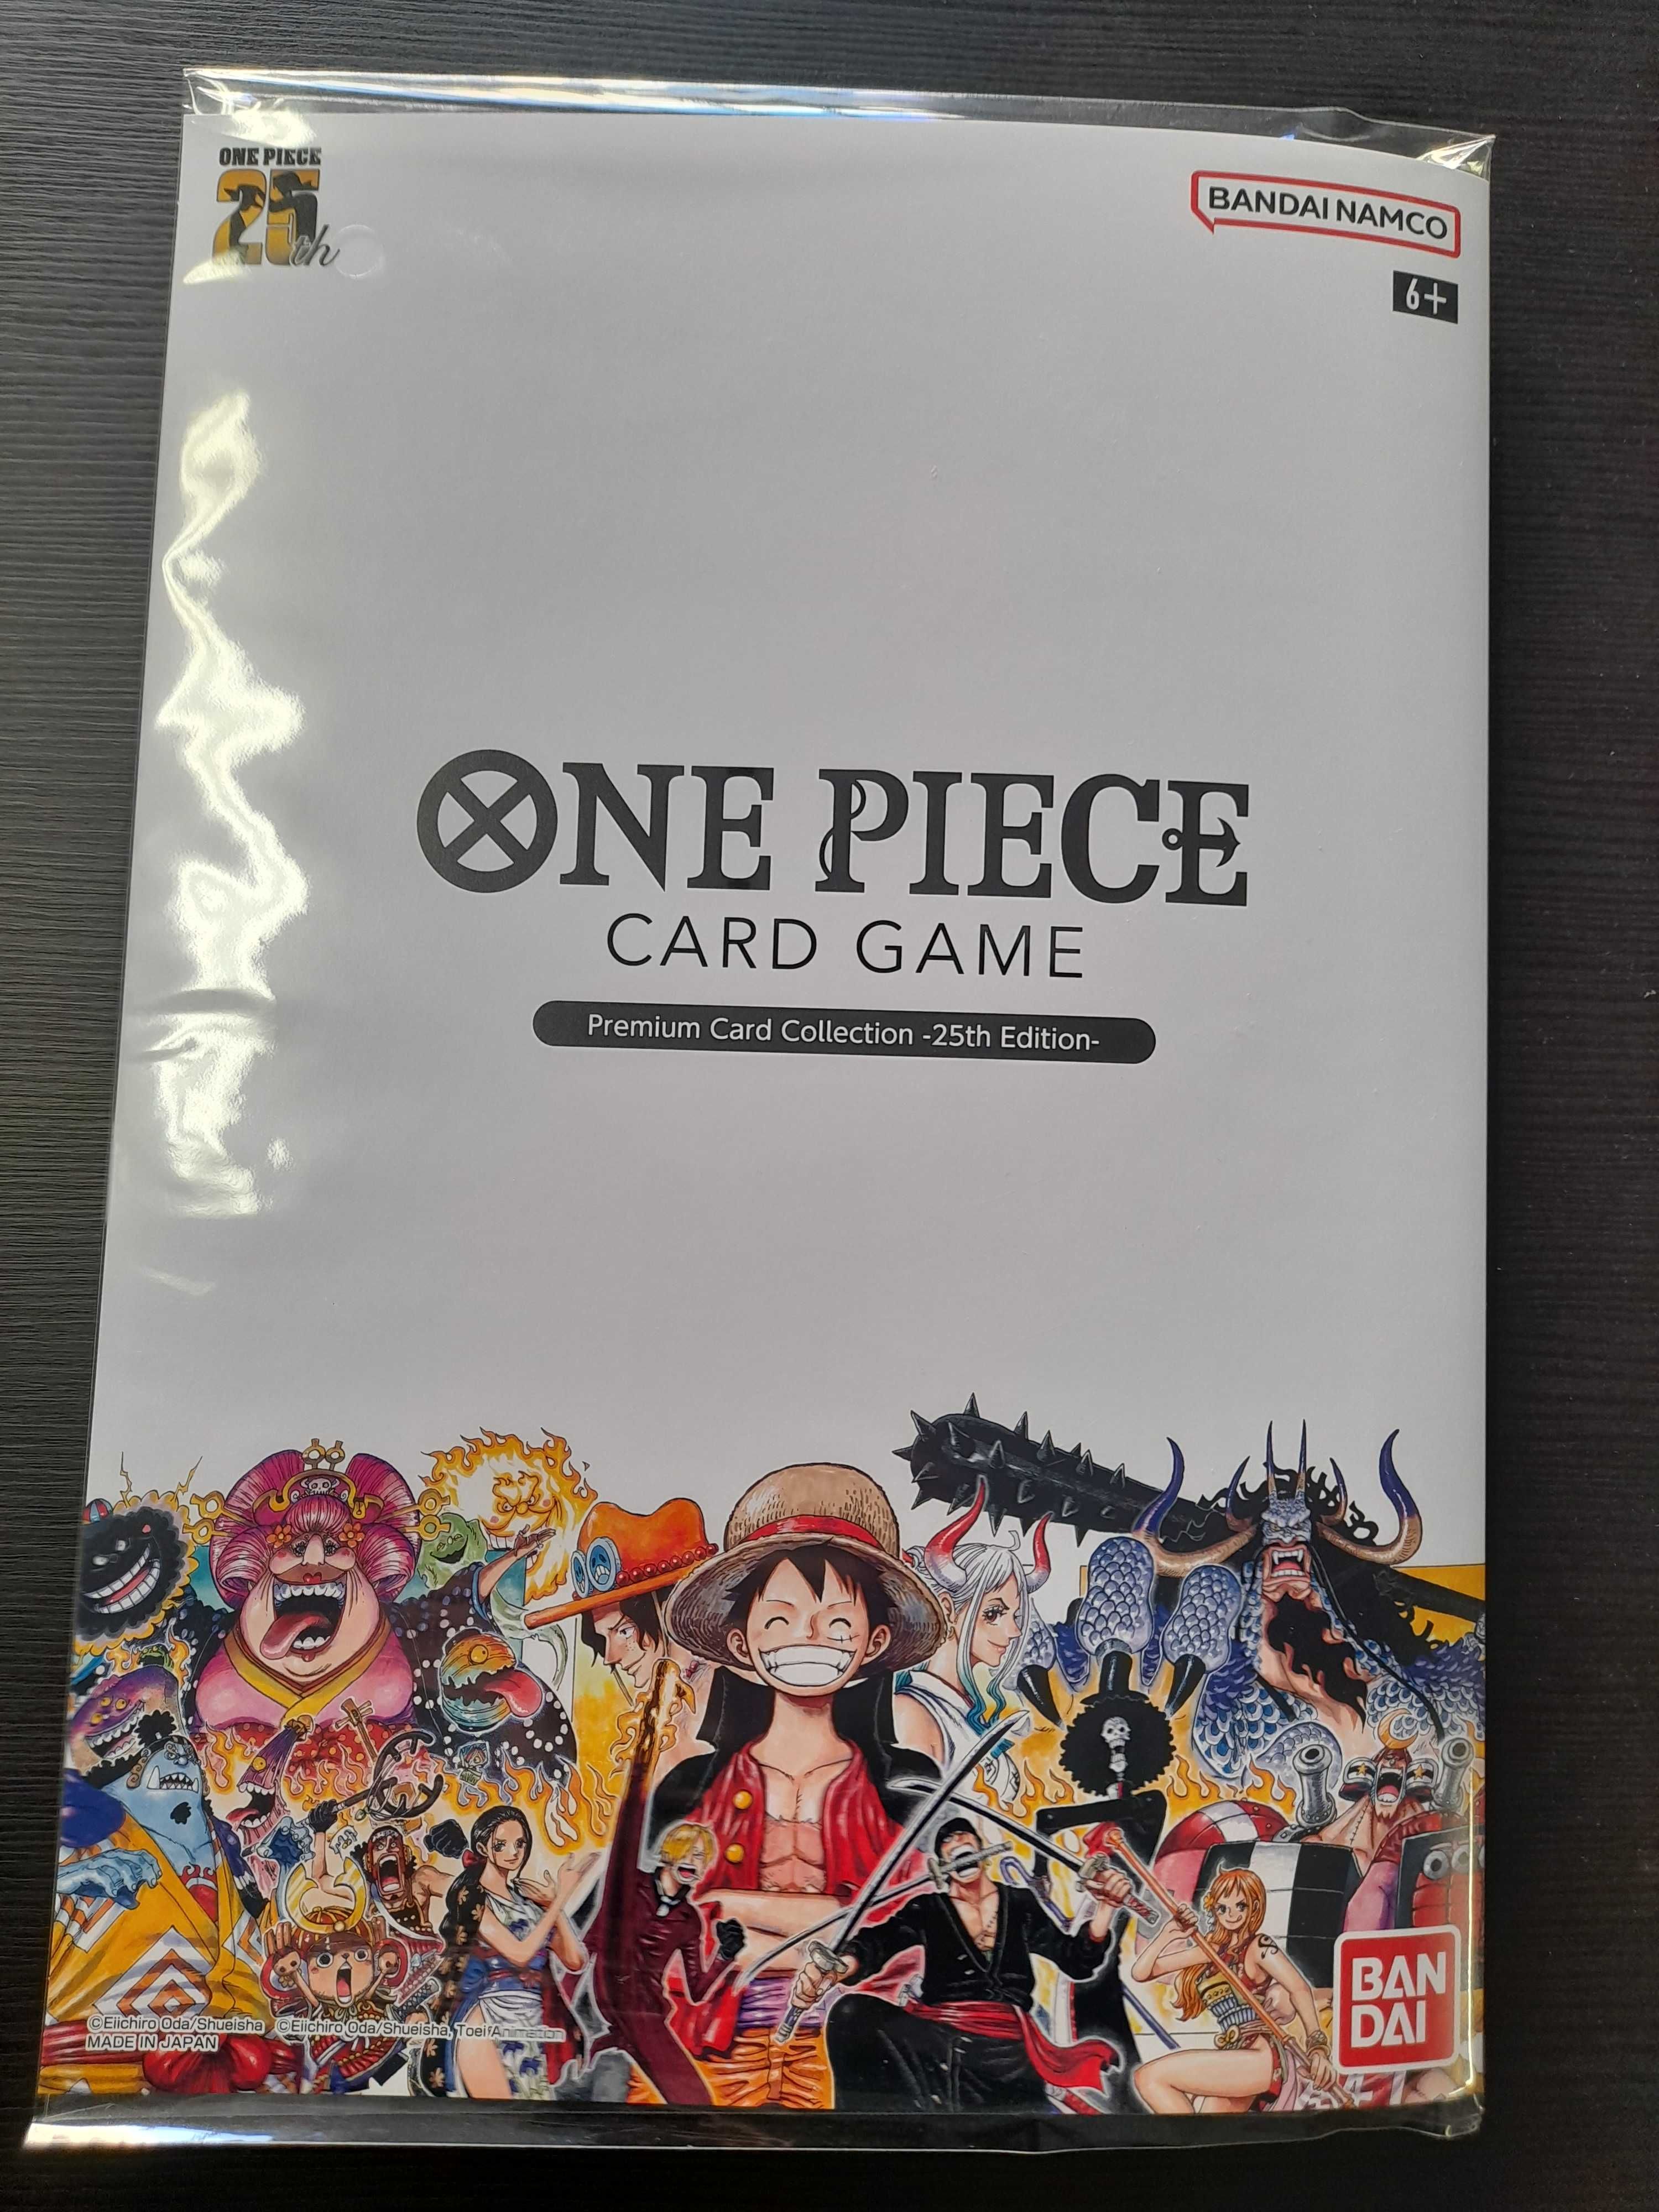 One Piece card game premium card collection 25th edition